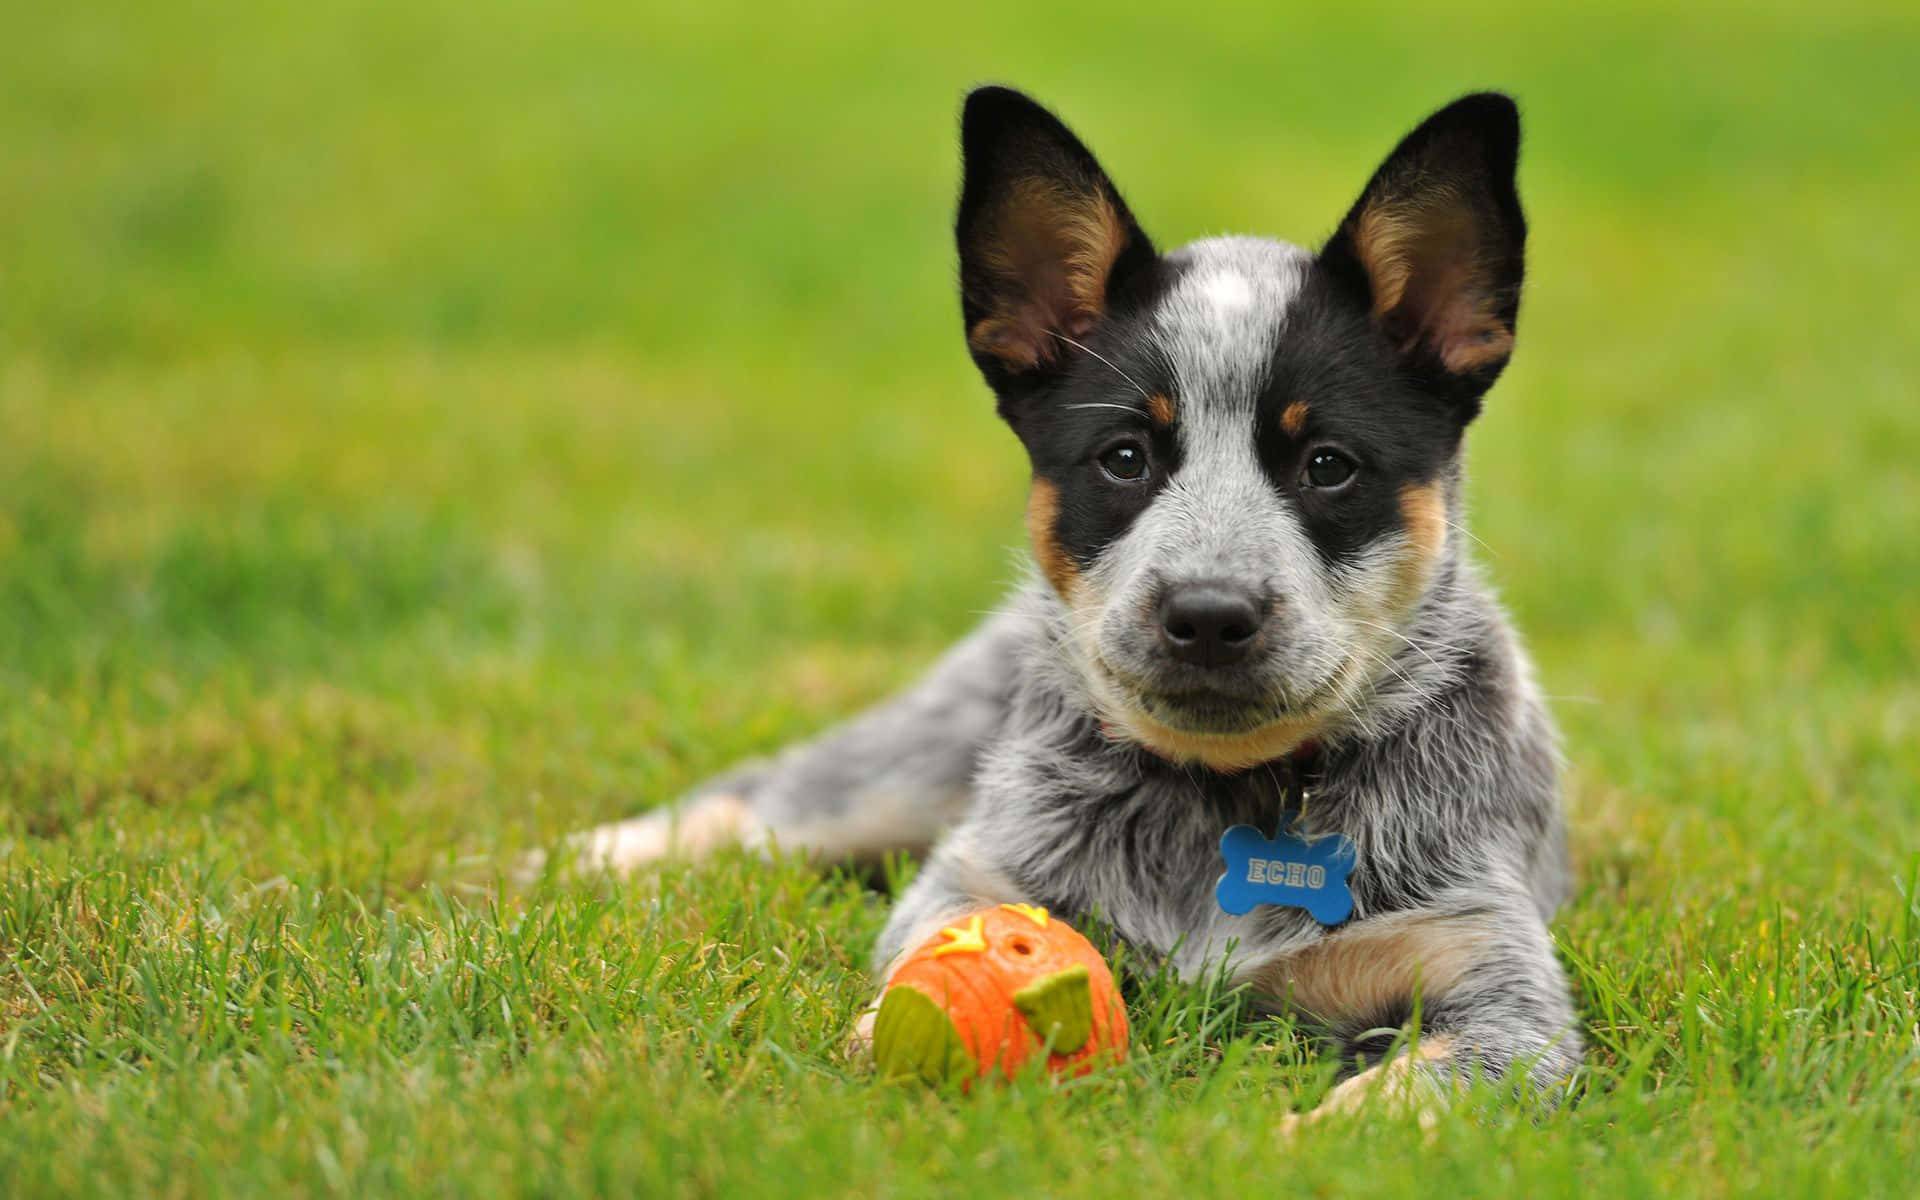 A Blue Heeler Puppy Laying On The Grass With A Toy